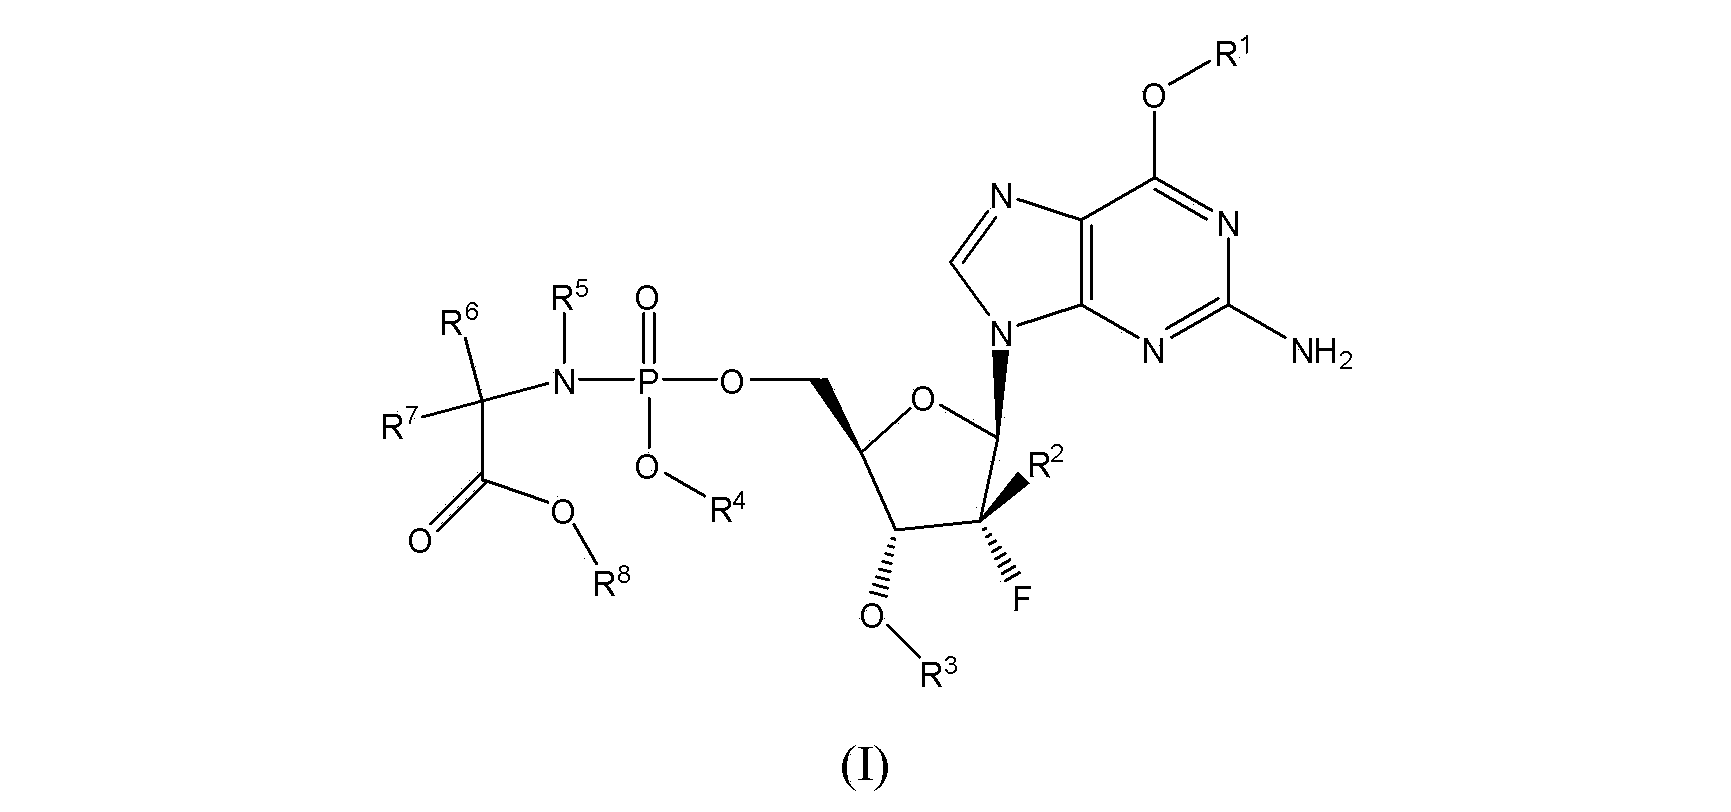 Heteroaryl phosphamide compounds with antiviral activity